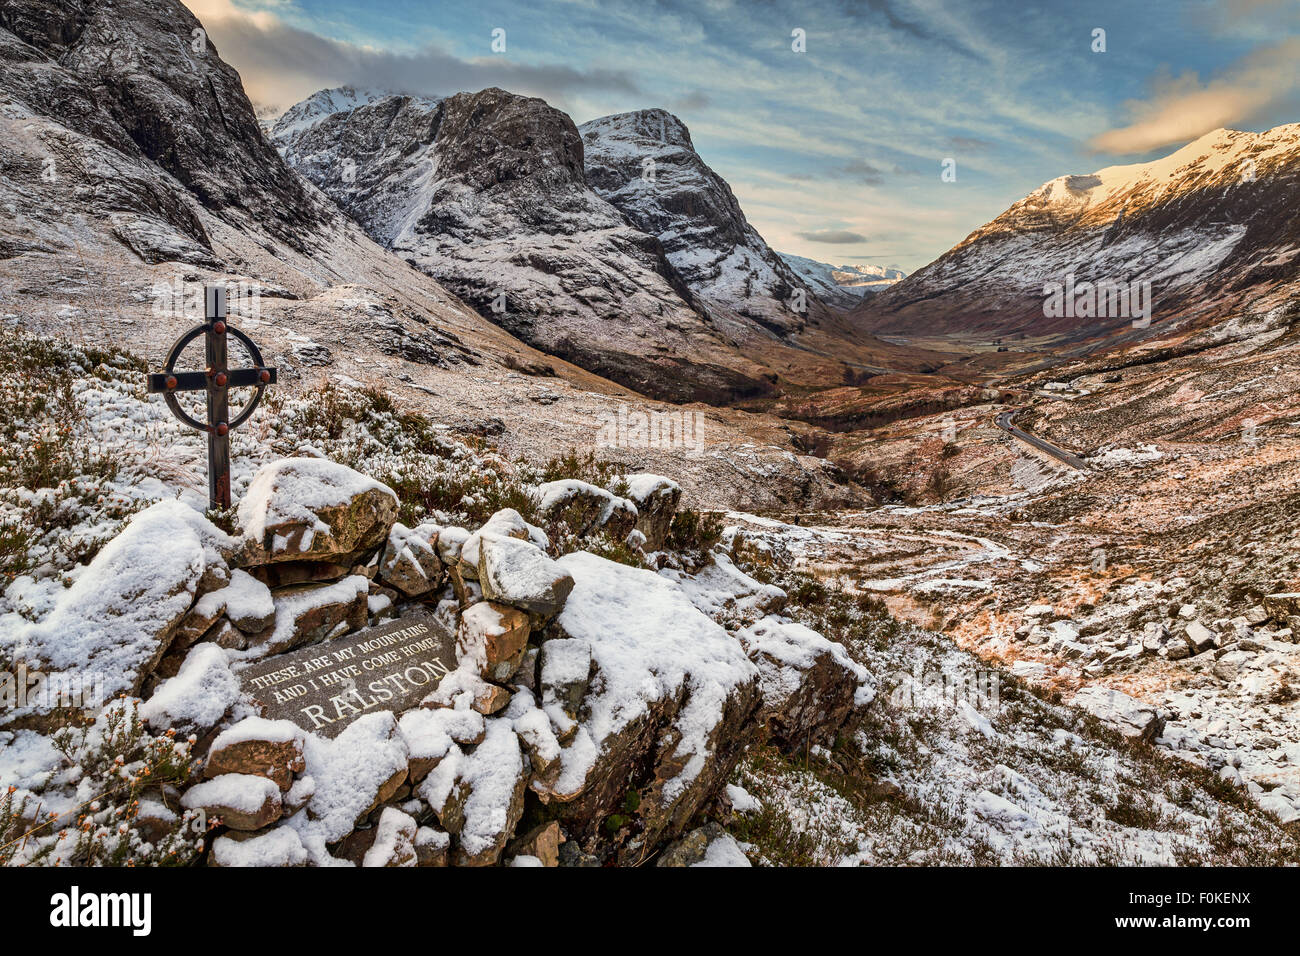 A cairn overlooking the three sisters mountain range in Glencoe/Glen Coe, Highlands, Scotland - Ralston, Mountains, Come Home Stock Photo